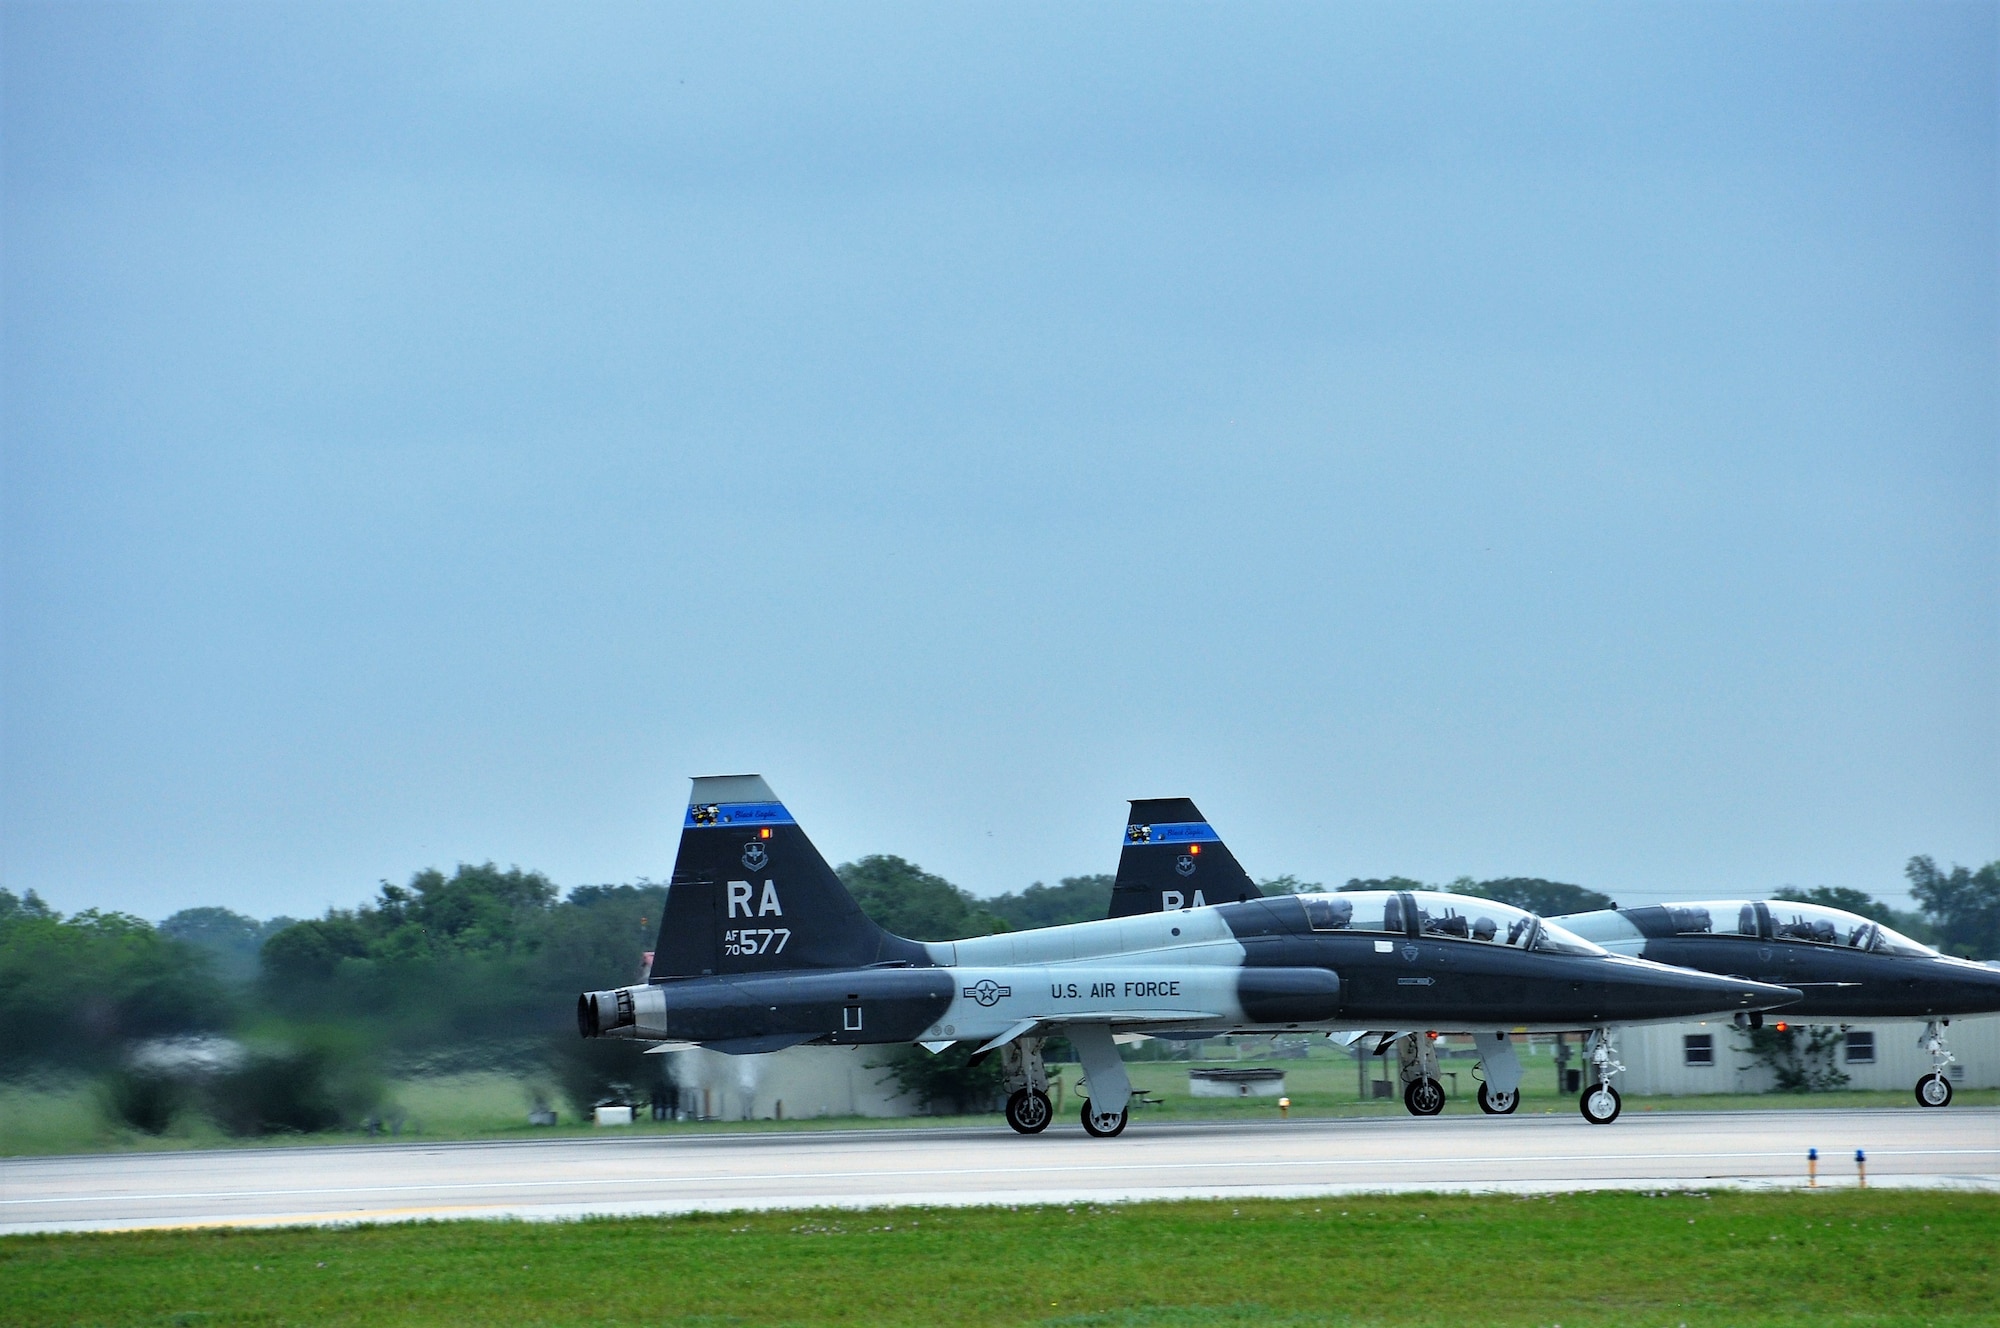 T-38s accomplish a formation takeoff at JBSA-Randolph during the 2018 Cobras in the Sky exercise. (U.S. Air Force photo by Janis El Shabazz)